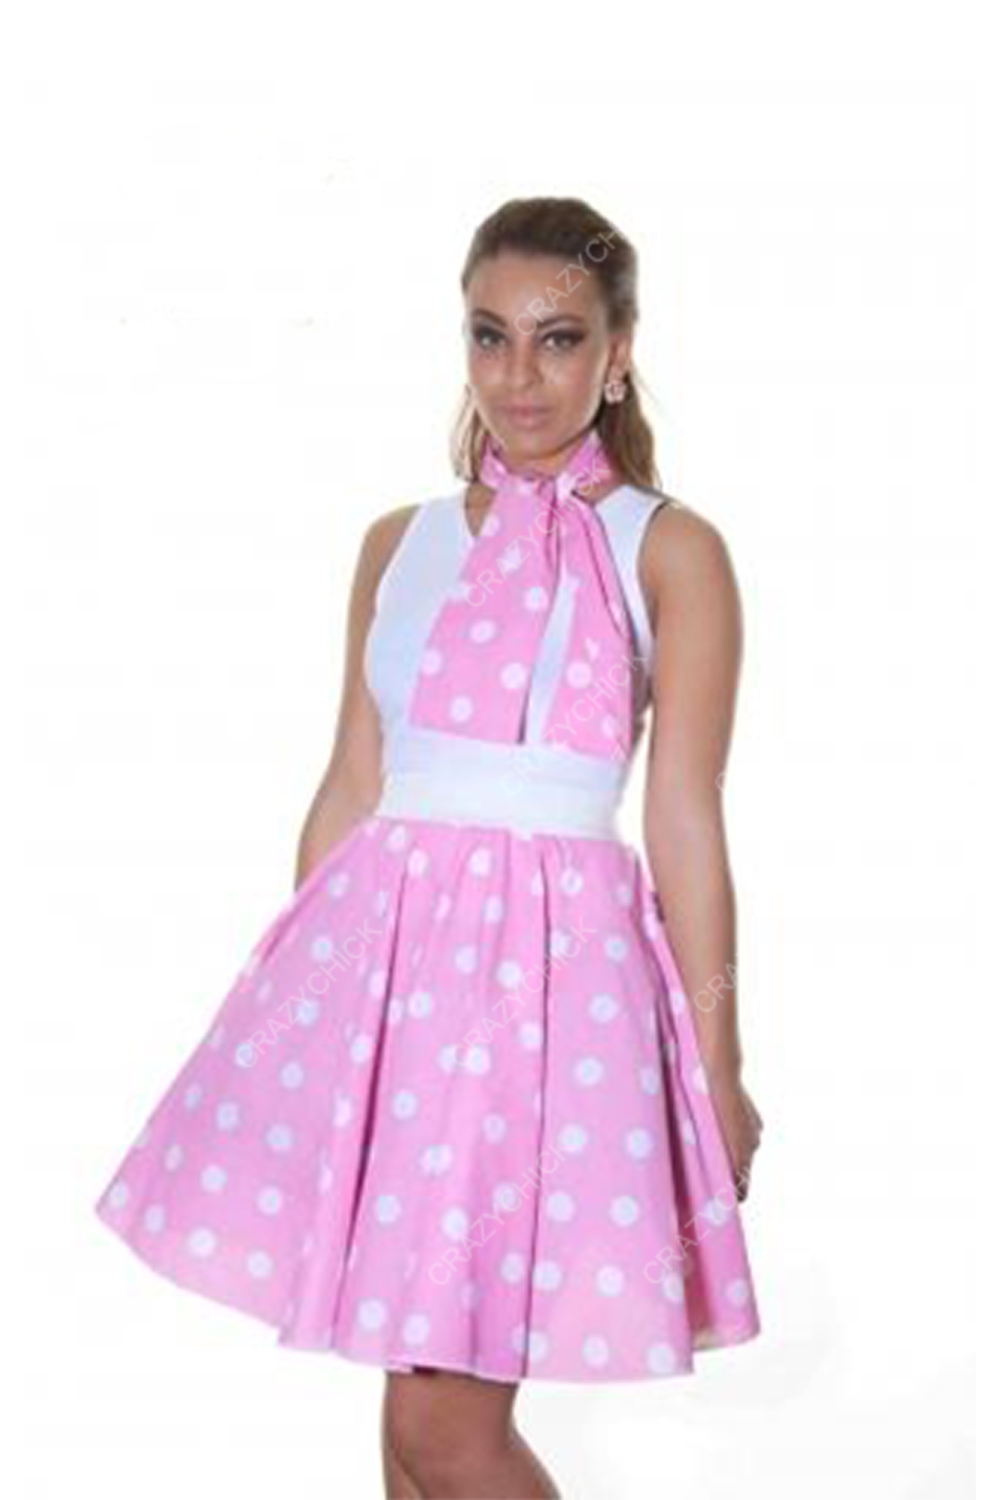 Crazy Chick Adult Pink White Polka Dot Skirt (18 Inches)